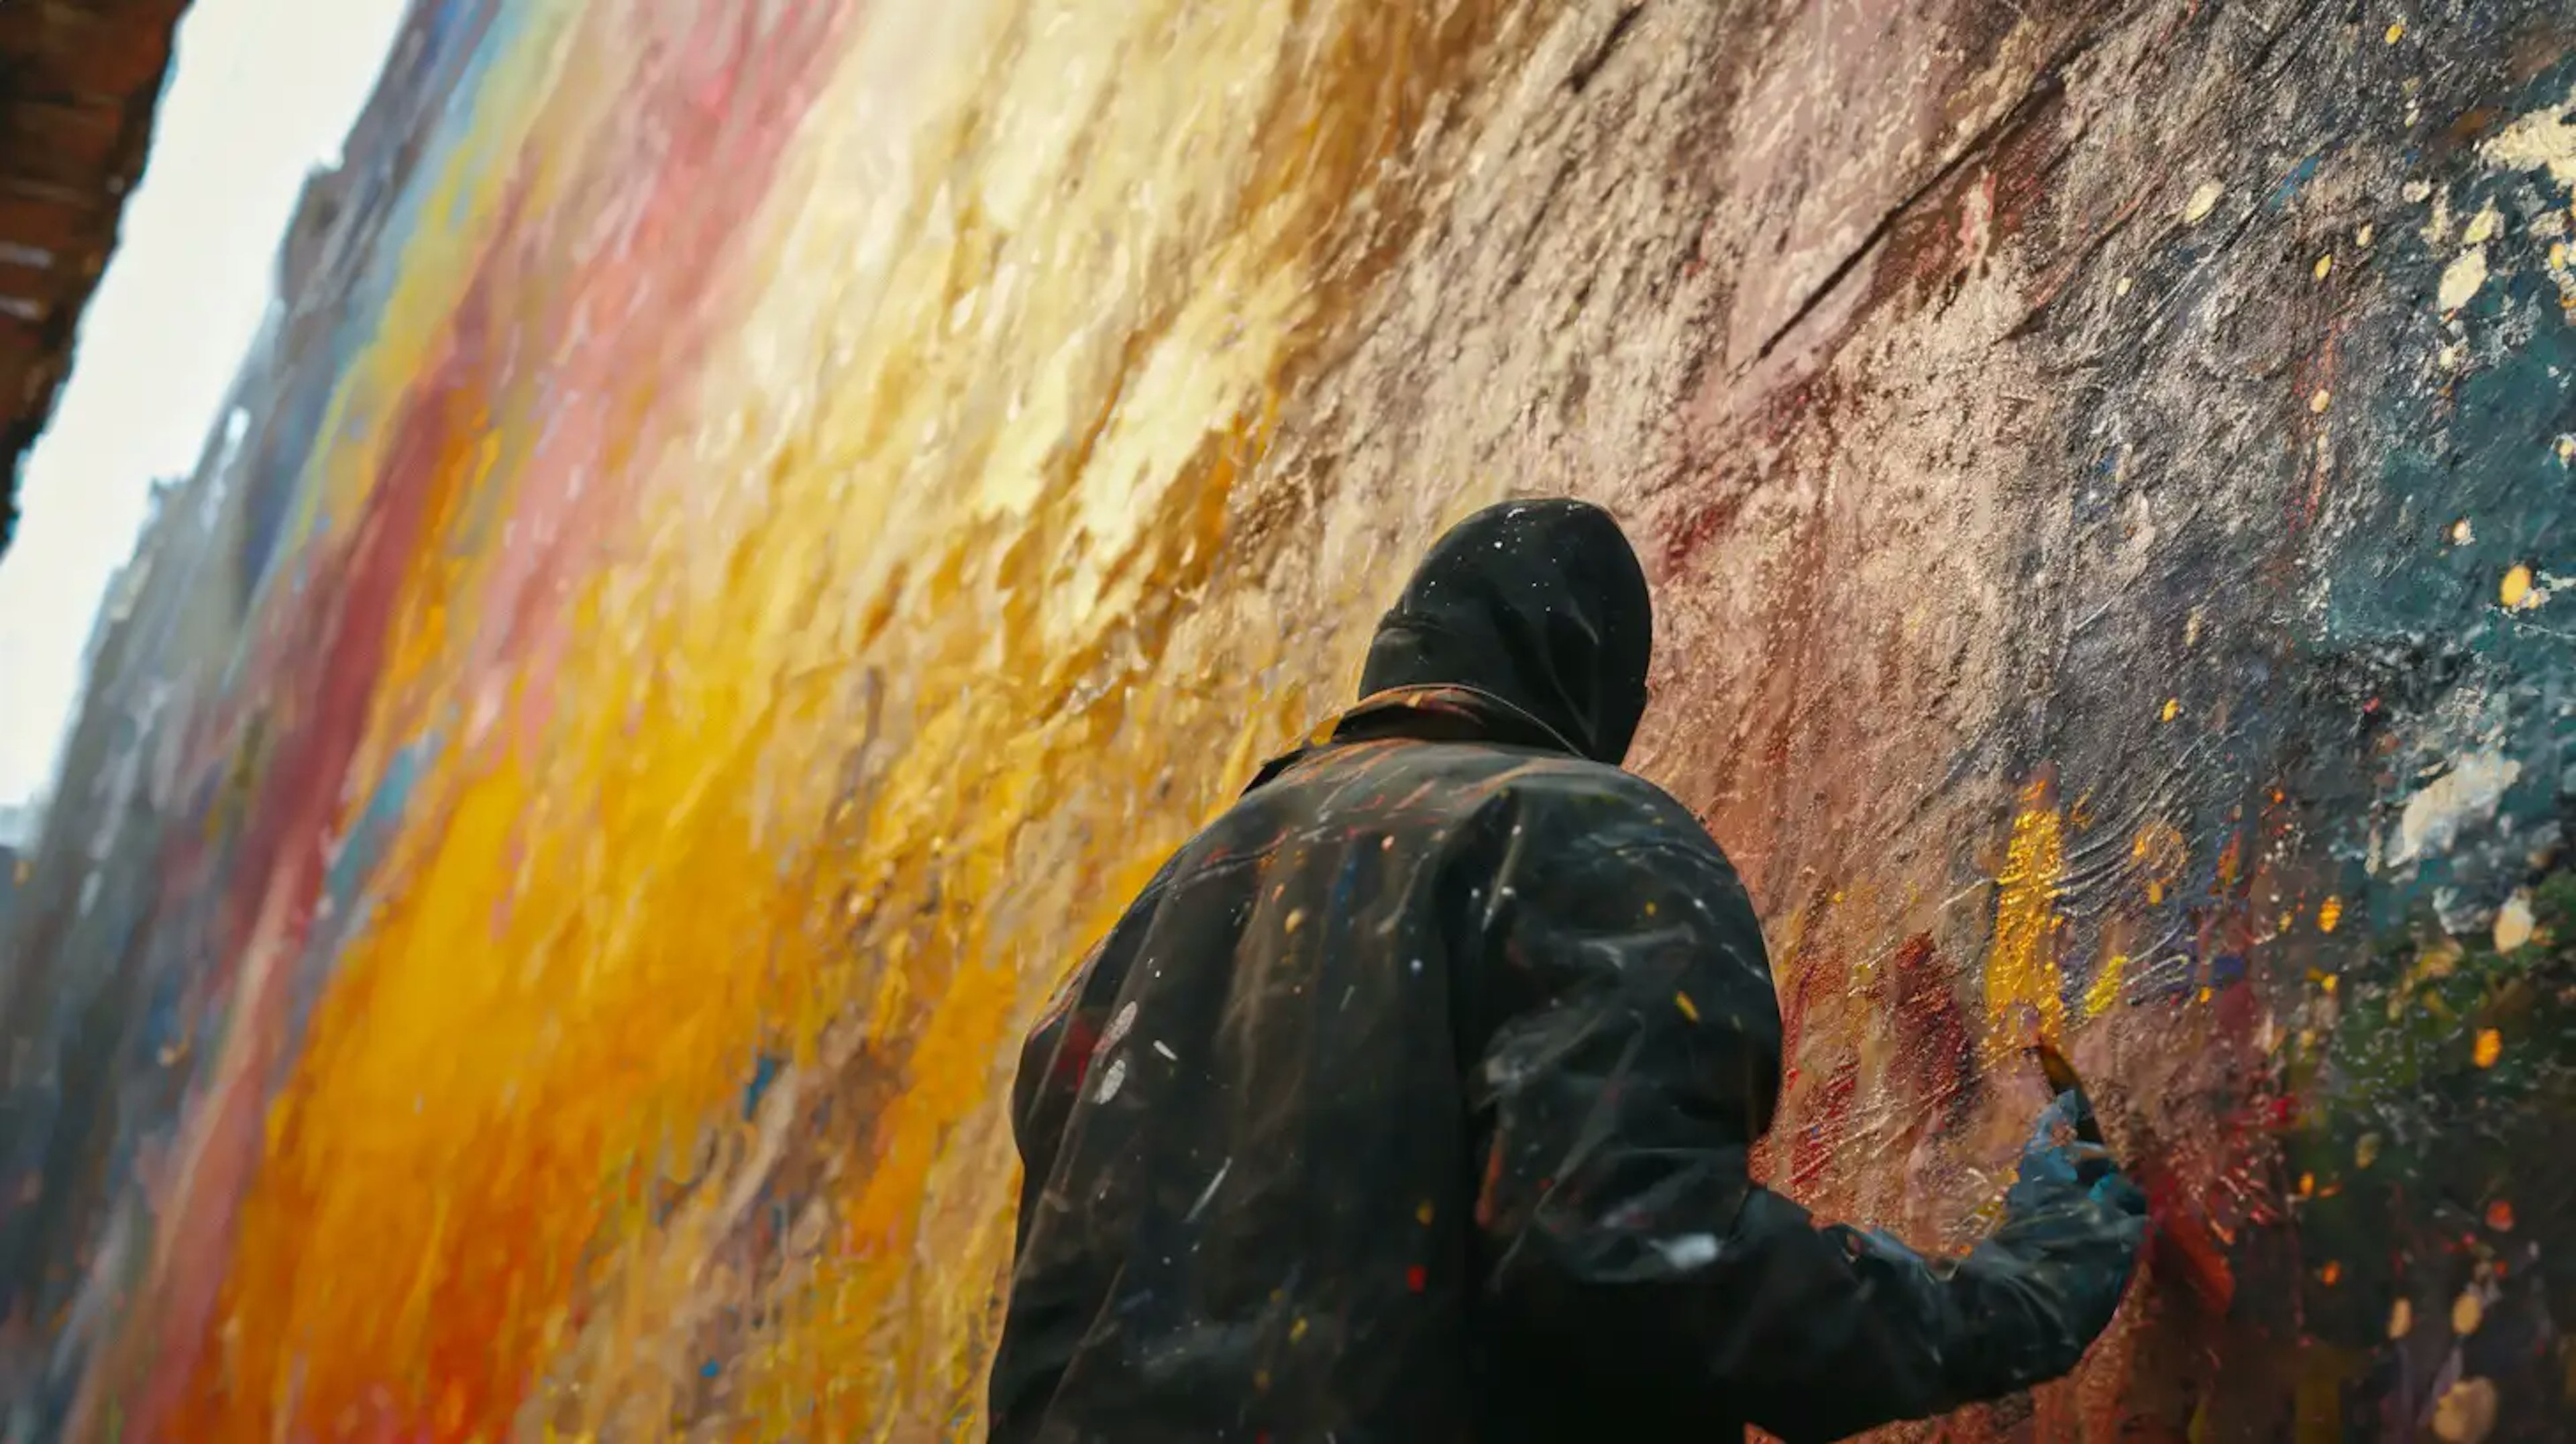 A man prepares to paint a mural on a concrete wall.